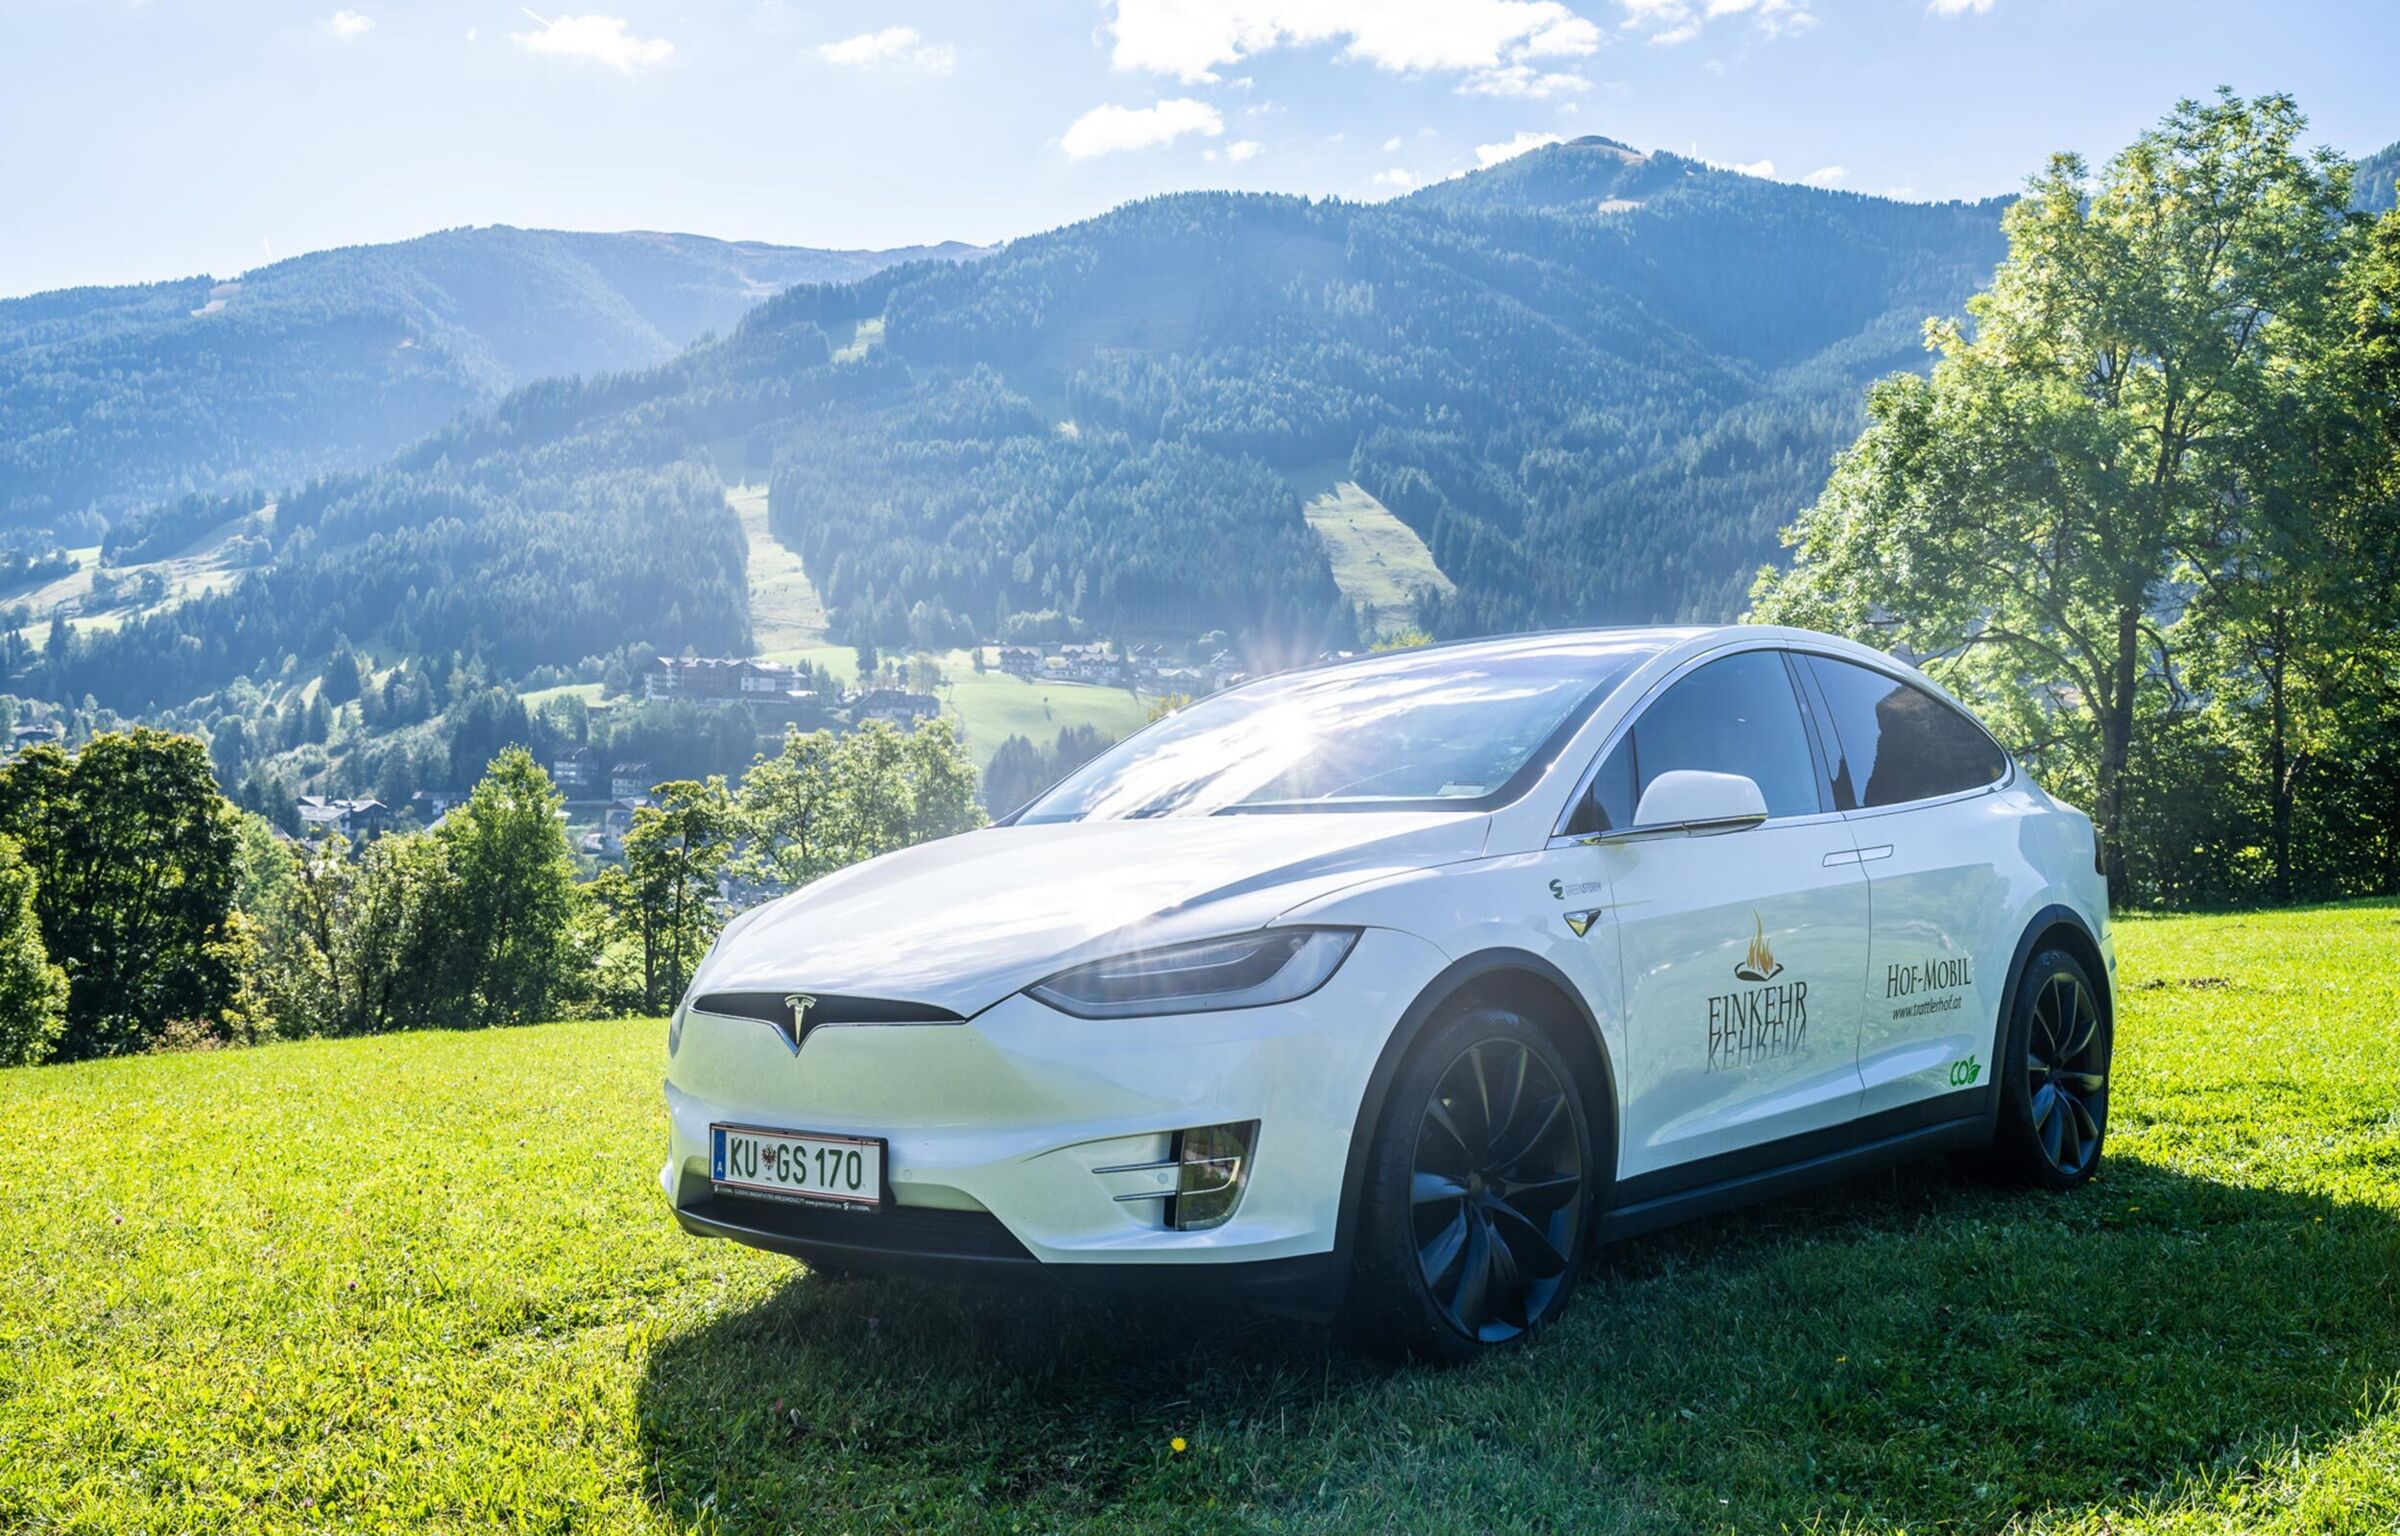 A white Tesla with the Trattlerhoflogo on the driver's side door is parked in a meadow.